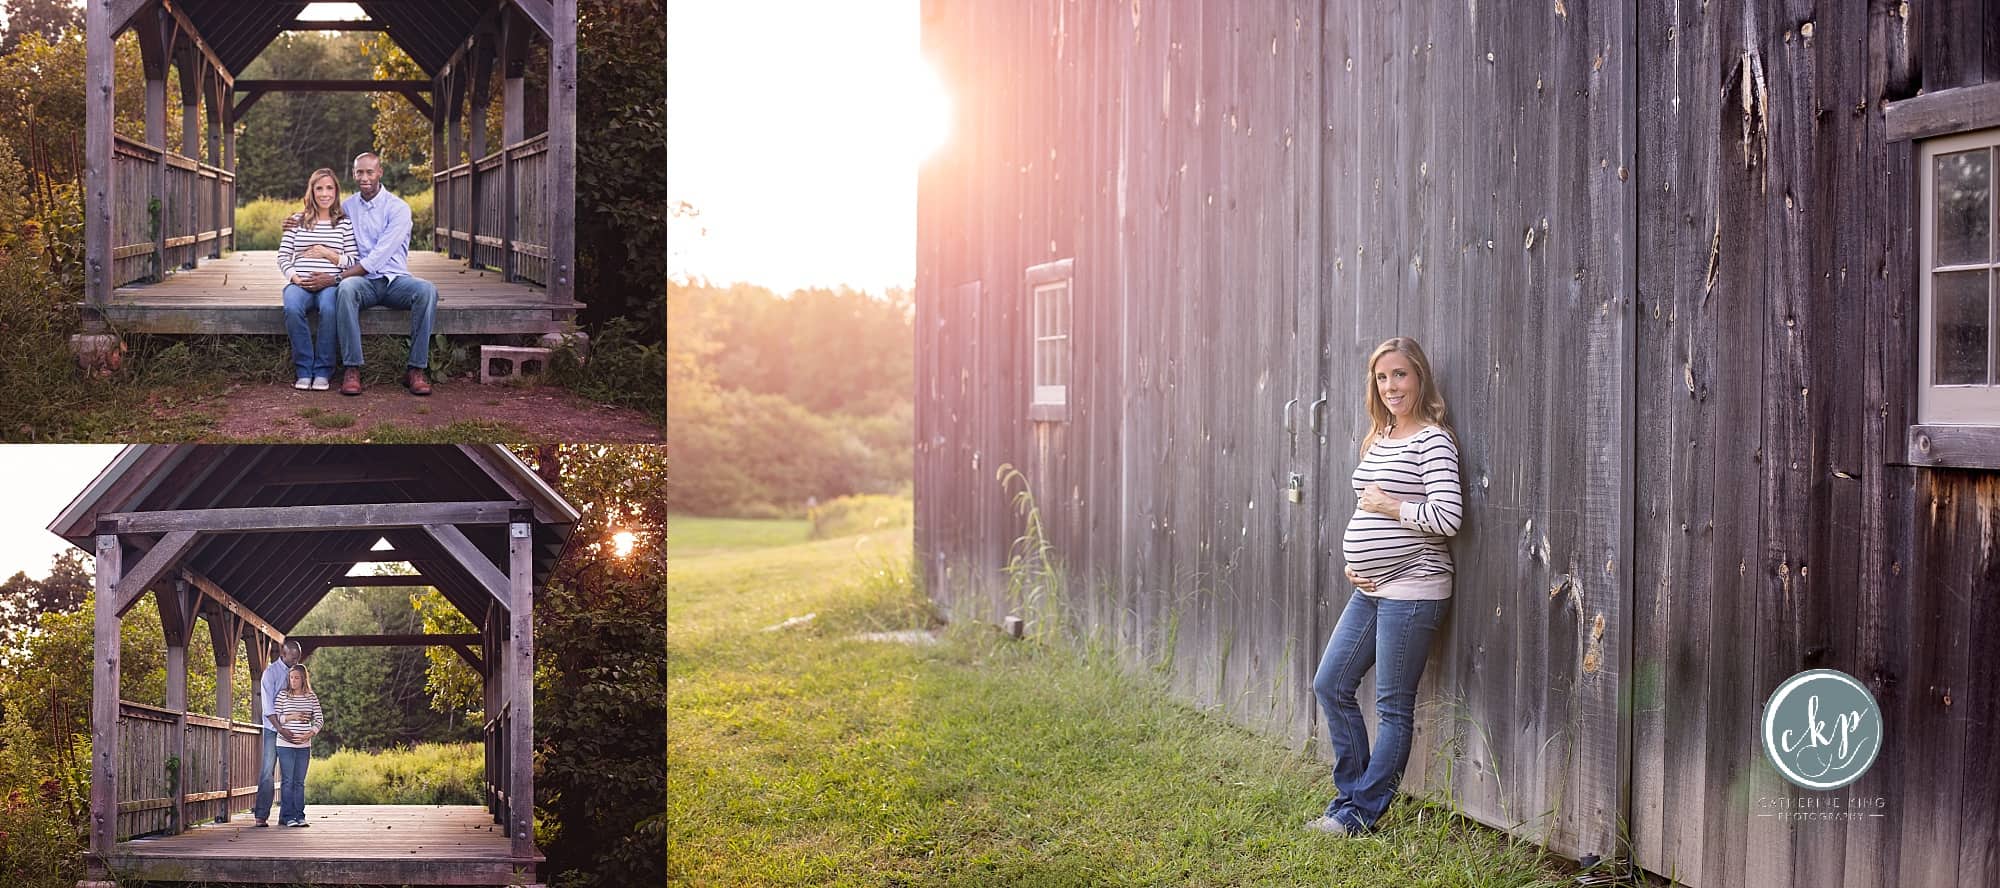 early fall ct maternity photography session at bauer park in madison ct by catherine king photography a ct maternity photographer ct shoreline